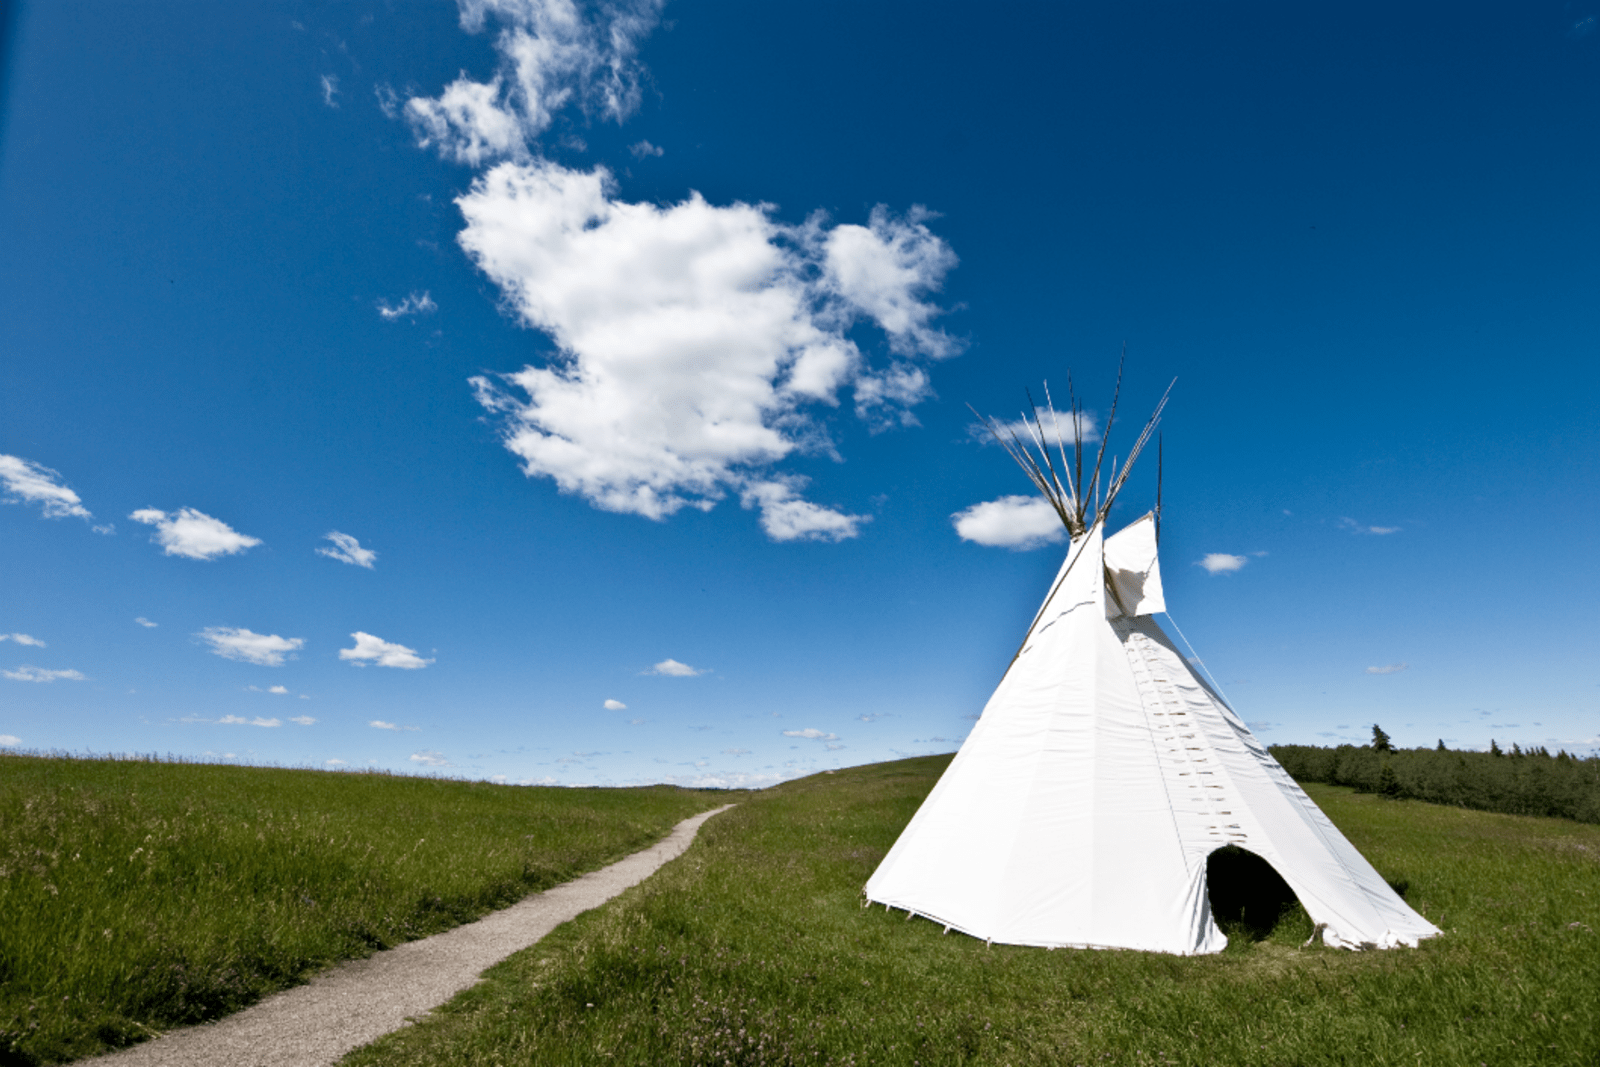 At Buffalo Rock, travellers can stay in a tipi camp